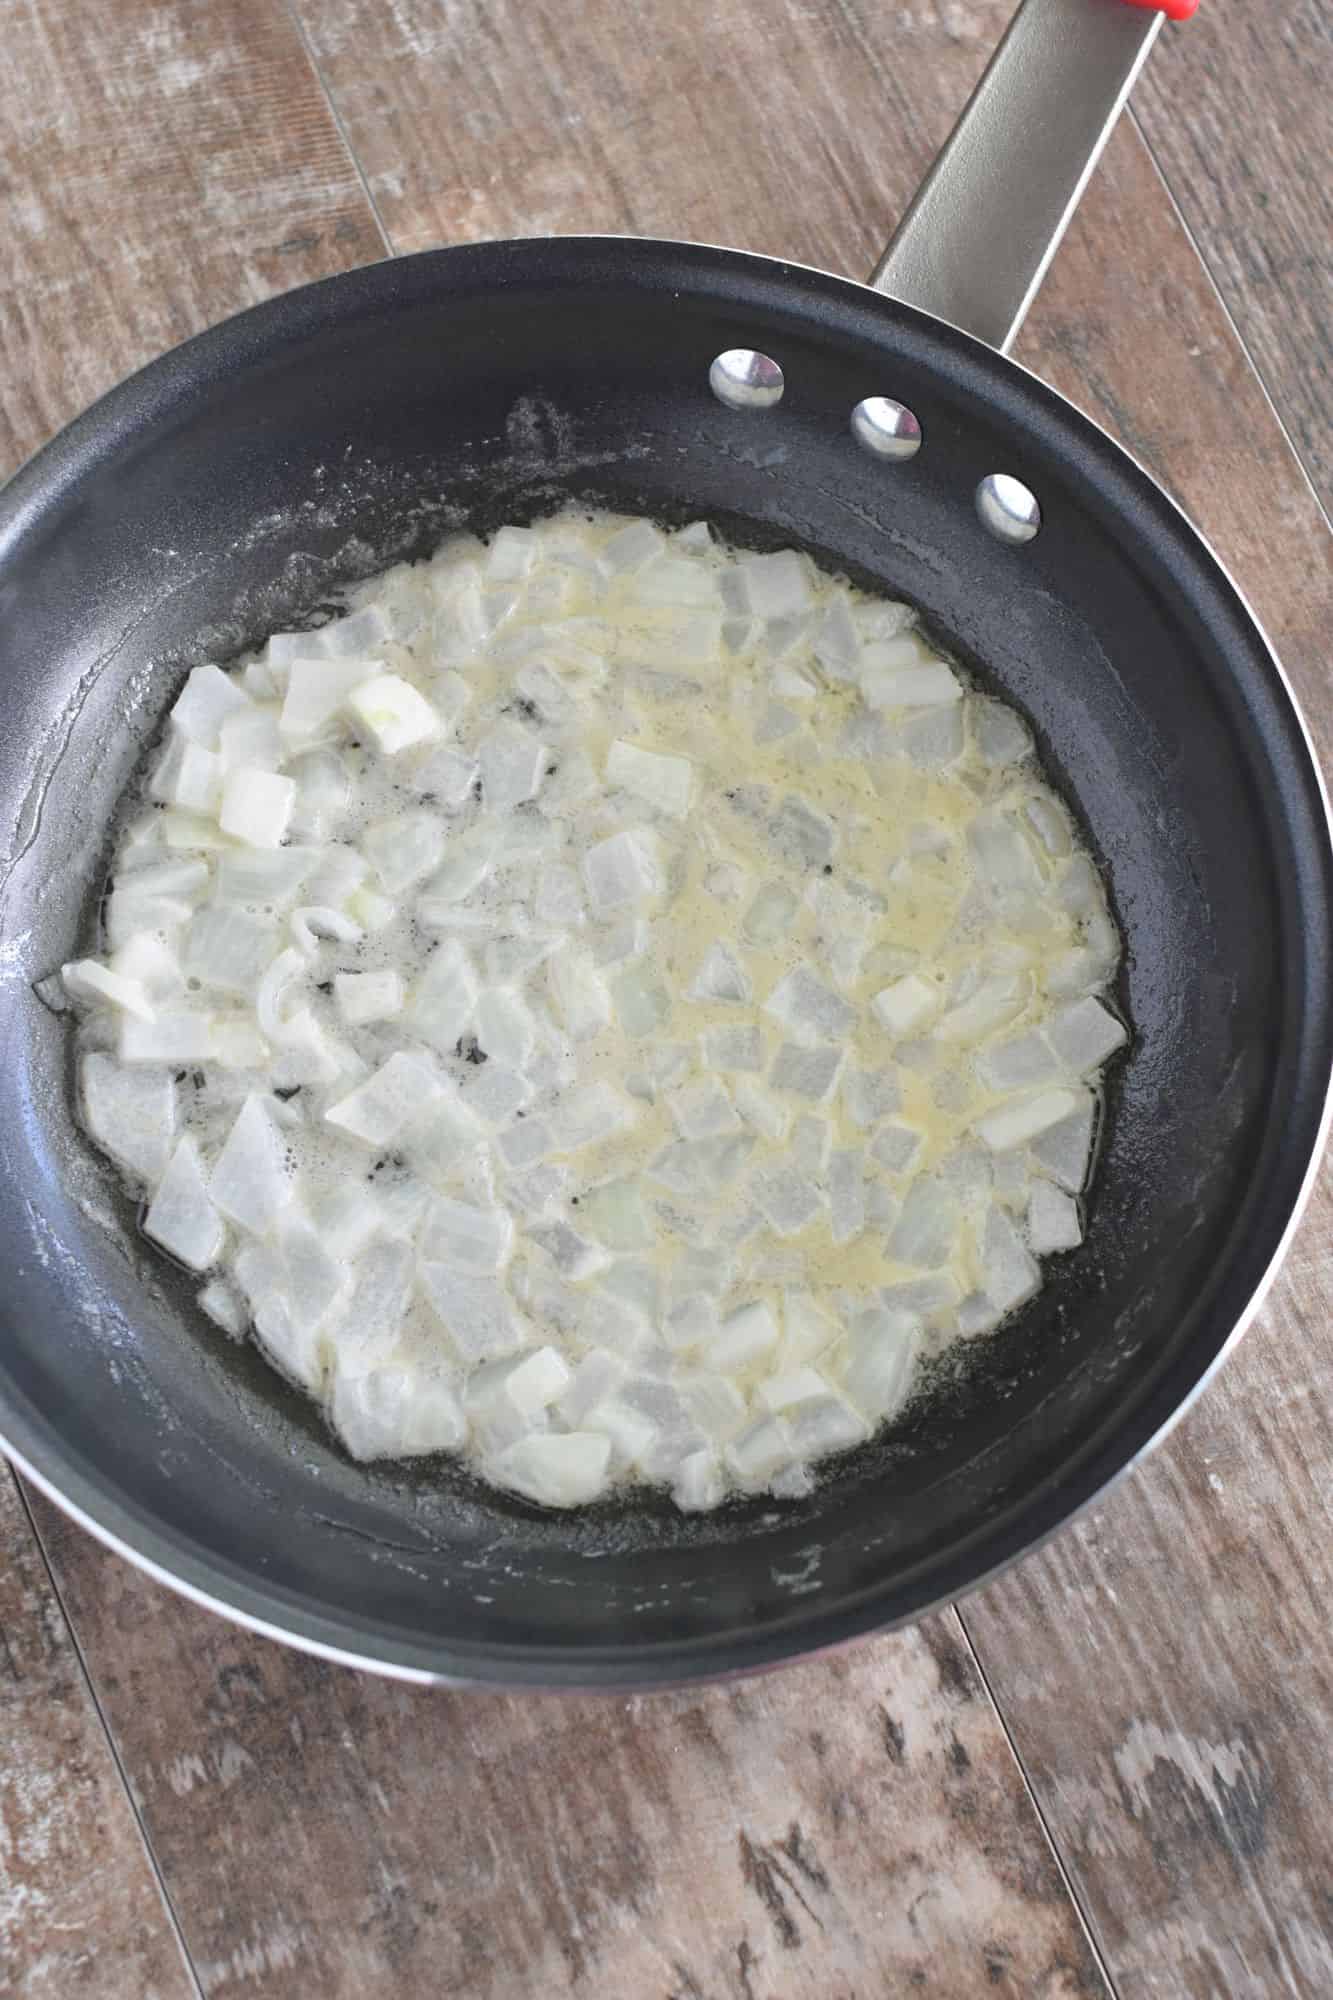 Cooking onion in vegan butter in a non-stick pan